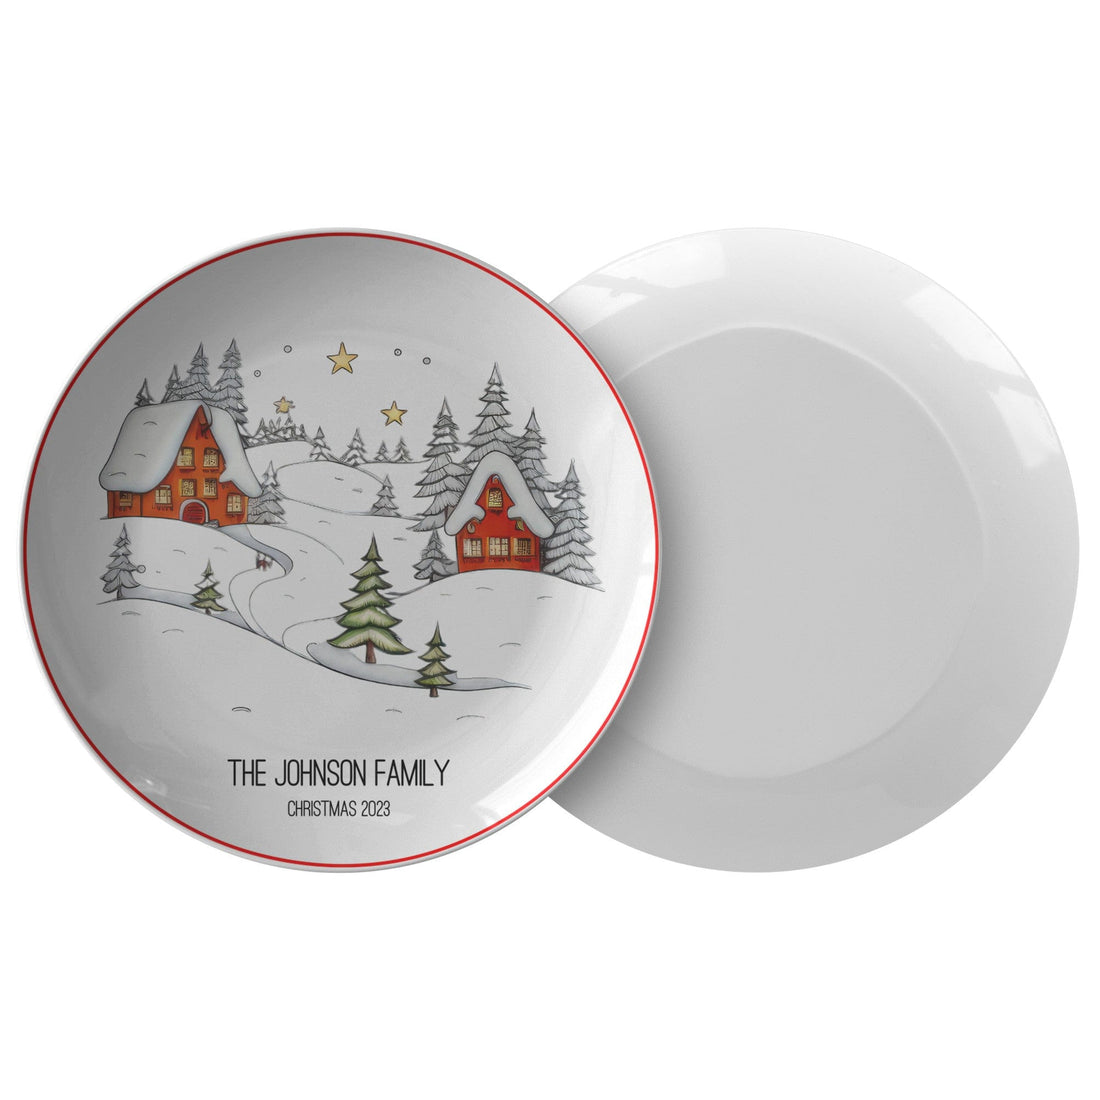 teelaunch Personalized Family Name Whimsical Winter Landscape Dinner Plate Kitchenware Single 9820SINGLE